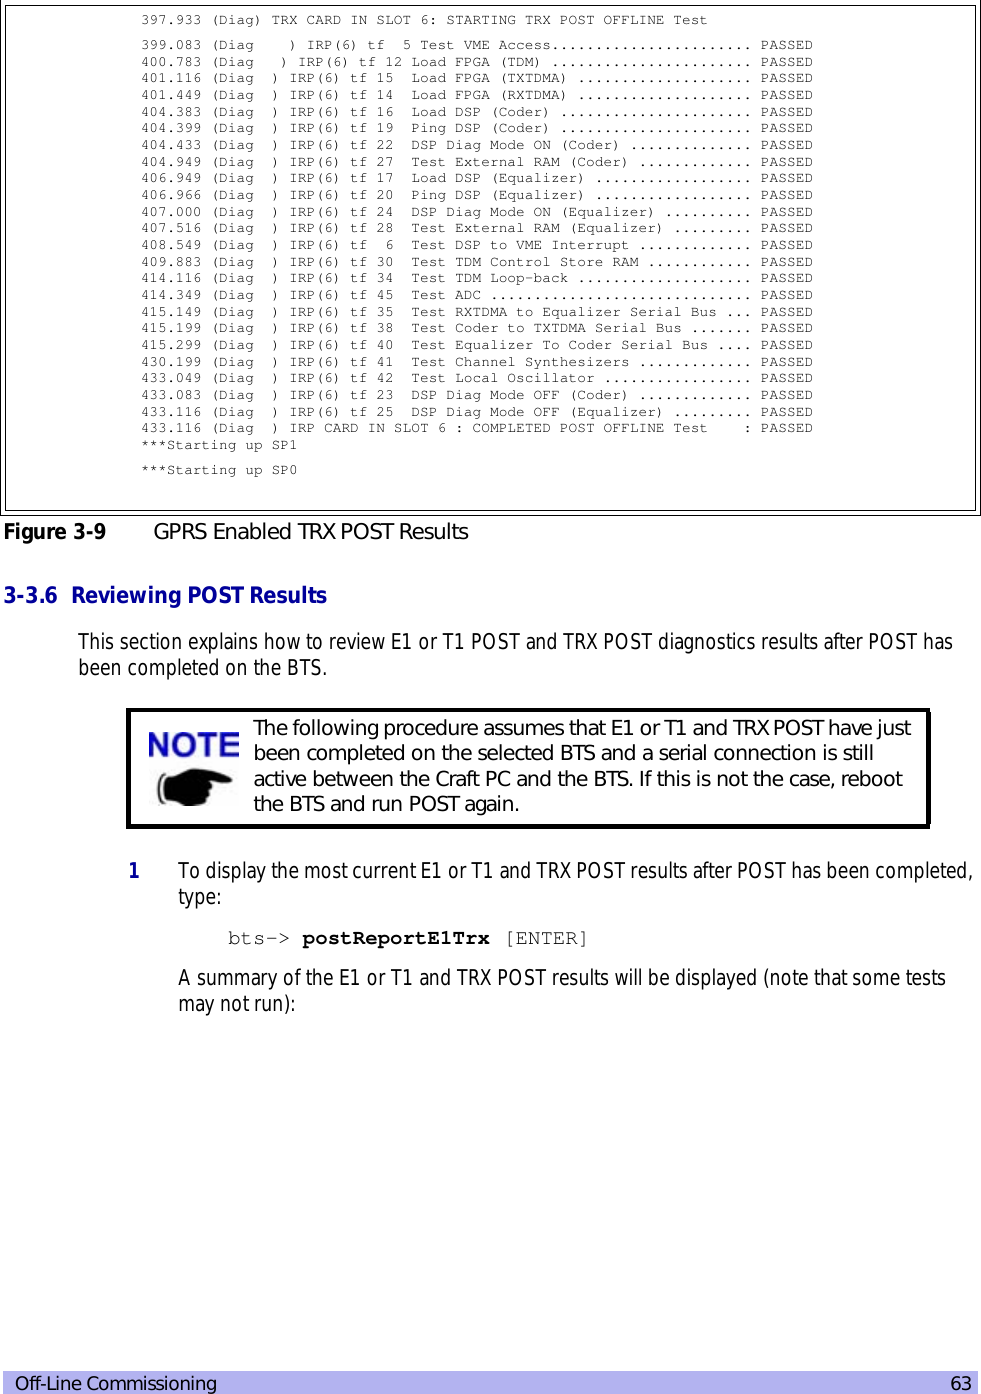  Off-Line Commissioning 633-3.6  Reviewing POST ResultsThis section explains how to review E1 or T1 POST and TRX POST diagnostics results after POST has been completed on the BTS.1To display the most current E1 or T1 and TRX POST results after POST has been completed, type:bts-&gt; postReportE1Trx [ENTER]A summary of the E1 or T1 and TRX POST results will be displayed (note that some tests may not run):397.933 (Diag) TRX CARD IN SLOT 6: STARTING TRX POST OFFLINE Test399.083 (Diag    ) IRP(6) tf  5 Test VME Access....................... PASSED  400.783 (Diag   ) IRP(6) tf 12 Load FPGA (TDM) ....................... PASSED  401.116 (Diag  ) IRP(6) tf 15  Load FPGA (TXTDMA) .................... PASSED  401.449 (Diag  ) IRP(6) tf 14  Load FPGA (RXTDMA) .................... PASSED  404.383 (Diag  ) IRP(6) tf 16  Load DSP (Coder) ...................... PASSED  404.399 (Diag  ) IRP(6) tf 19  Ping DSP (Coder) ...................... PASSED  404.433 (Diag  ) IRP(6) tf 22  DSP Diag Mode ON (Coder) .............. PASSED  404.949 (Diag  ) IRP(6) tf 27  Test External RAM (Coder) ............. PASSED  406.949 (Diag  ) IRP(6) tf 17  Load DSP (Equalizer) .................. PASSED  406.966 (Diag  ) IRP(6) tf 20  Ping DSP (Equalizer) .................. PASSED  407.000 (Diag  ) IRP(6) tf 24  DSP Diag Mode ON (Equalizer) .......... PASSED  407.516 (Diag  ) IRP(6) tf 28  Test External RAM (Equalizer) ......... PASSED  408.549 (Diag  ) IRP(6) tf  6  Test DSP to VME Interrupt ............. PASSED  409.883 (Diag  ) IRP(6) tf 30  Test TDM Control Store RAM ............ PASSED  414.116 (Diag  ) IRP(6) tf 34  Test TDM Loop-back .................... PASSED  414.349 (Diag  ) IRP(6) tf 45  Test ADC .............................. PASSED  415.149 (Diag  ) IRP(6) tf 35  Test RXTDMA to Equalizer Serial Bus ... PASSED  415.199 (Diag  ) IRP(6) tf 38  Test Coder to TXTDMA Serial Bus ....... PASSED  415.299 (Diag  ) IRP(6) tf 40  Test Equalizer To Coder Serial Bus .... PASSED  430.199 (Diag  ) IRP(6) tf 41  Test Channel Synthesizers ............. PASSED  433.049 (Diag  ) IRP(6) tf 42  Test Local Oscillator ................. PASSED  433.083 (Diag  ) IRP(6) tf 23  DSP Diag Mode OFF (Coder) ............. PASSED  433.116 (Diag  ) IRP(6) tf 25  DSP Diag Mode OFF (Equalizer) ......... PASSED  433.116 (Diag  ) IRP CARD IN SLOT 6 : COMPLETED POST OFFLINE Test    : PASSED ***Starting up SP1***Starting up SP0Figure 3-9 GPRS Enabled TRX POST ResultsThe following procedure assumes that E1 or T1 and TRX POST have just been completed on the selected BTS and a serial connection is still active between the Craft PC and the BTS. If this is not the case, reboot the BTS and run POST again.